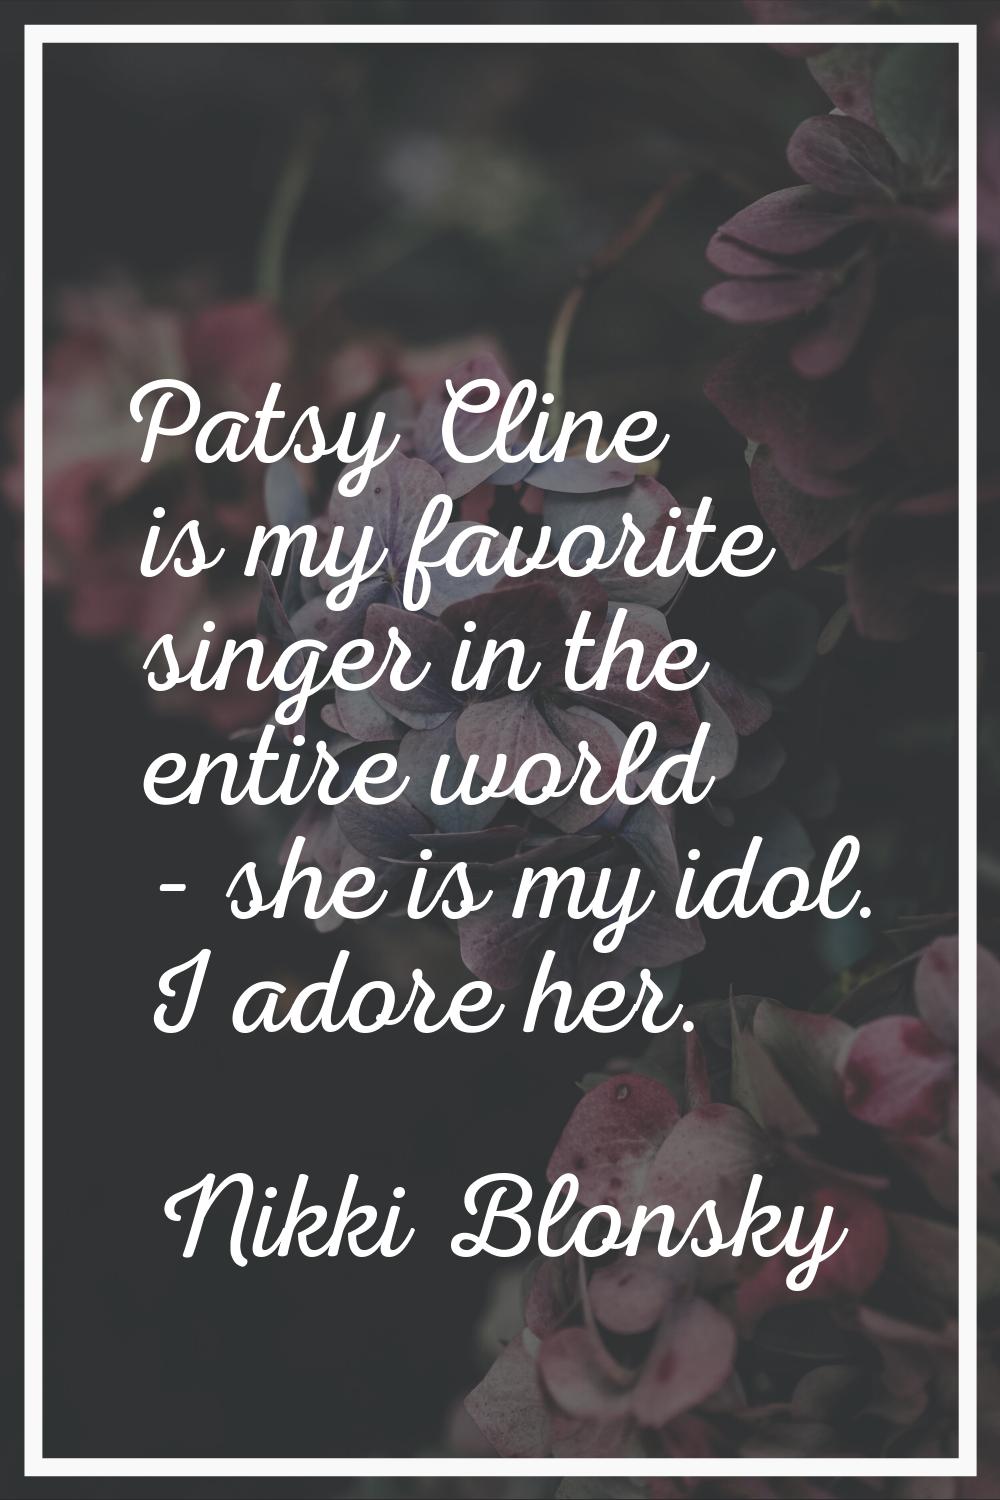 Patsy Cline is my favorite singer in the entire world - she is my idol. I adore her.